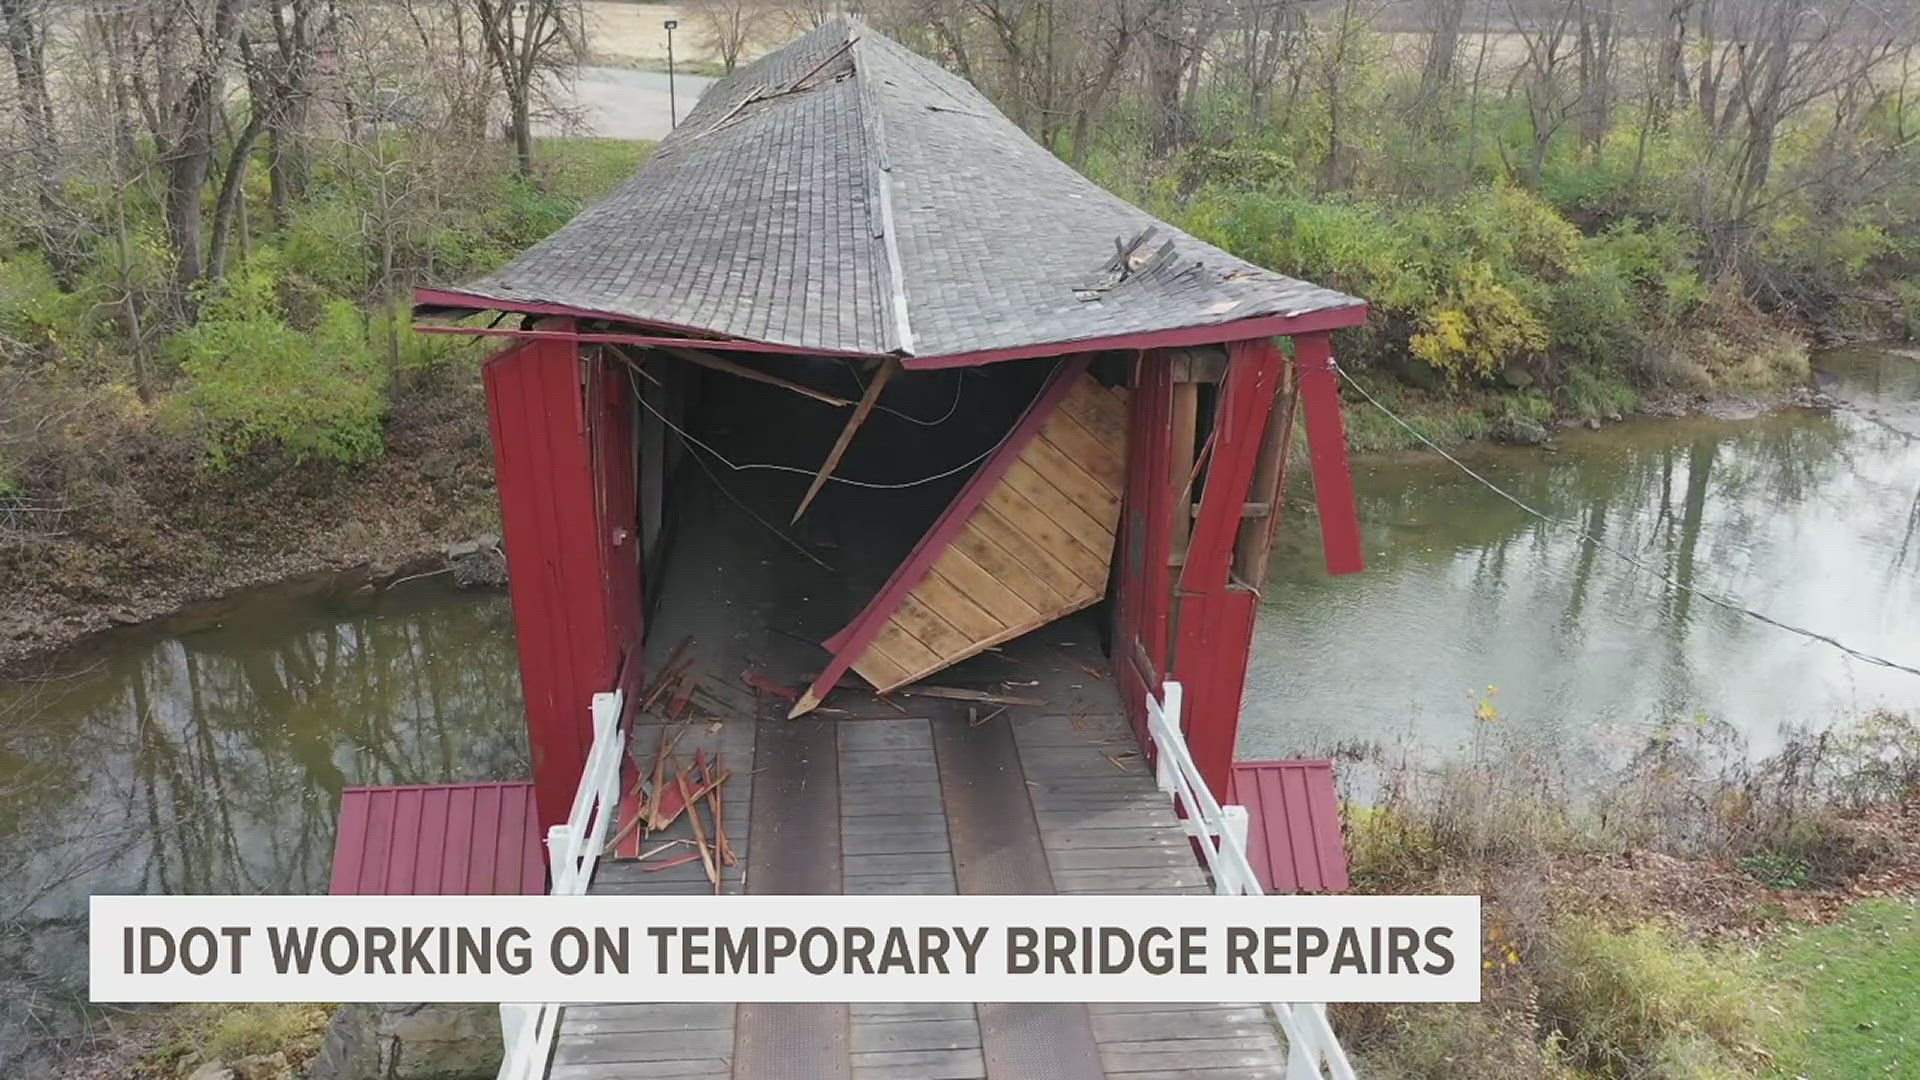 IDOT has already began temporary repair work, but the department said it will be several months before it can recommend permanent repair work.